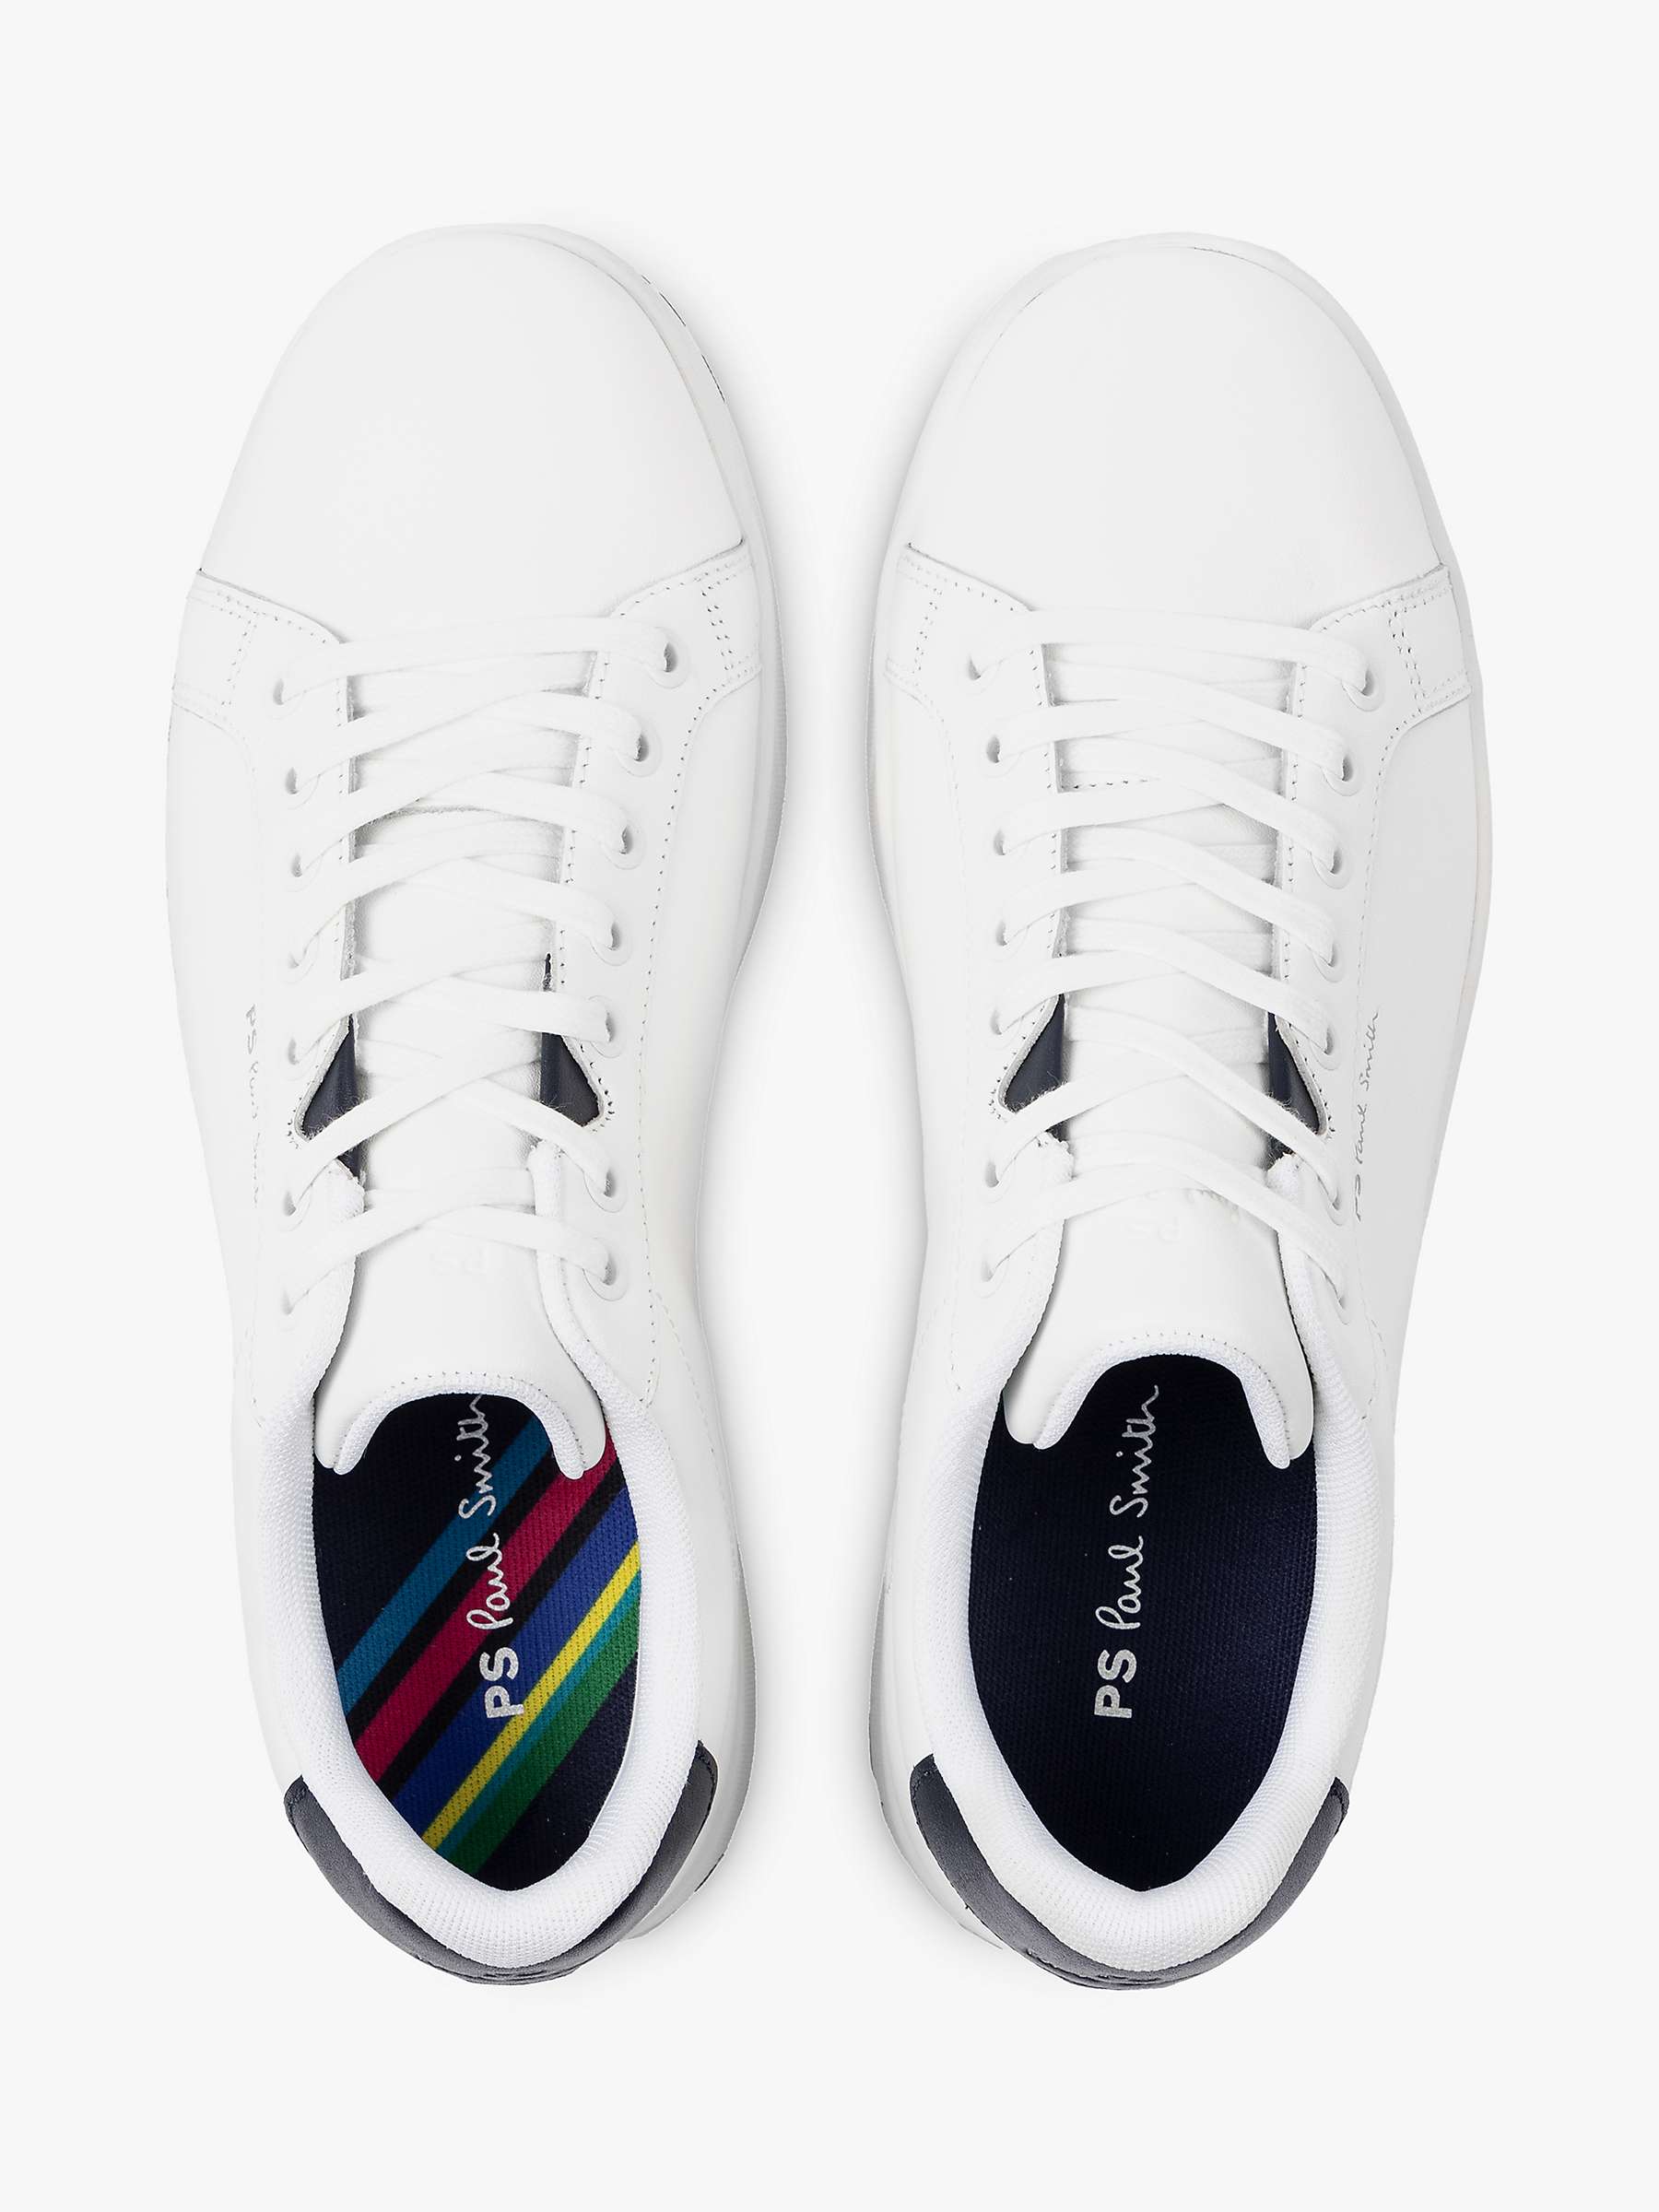 Buy Paul Smith Albany Leather Trainers, White Online at johnlewis.com